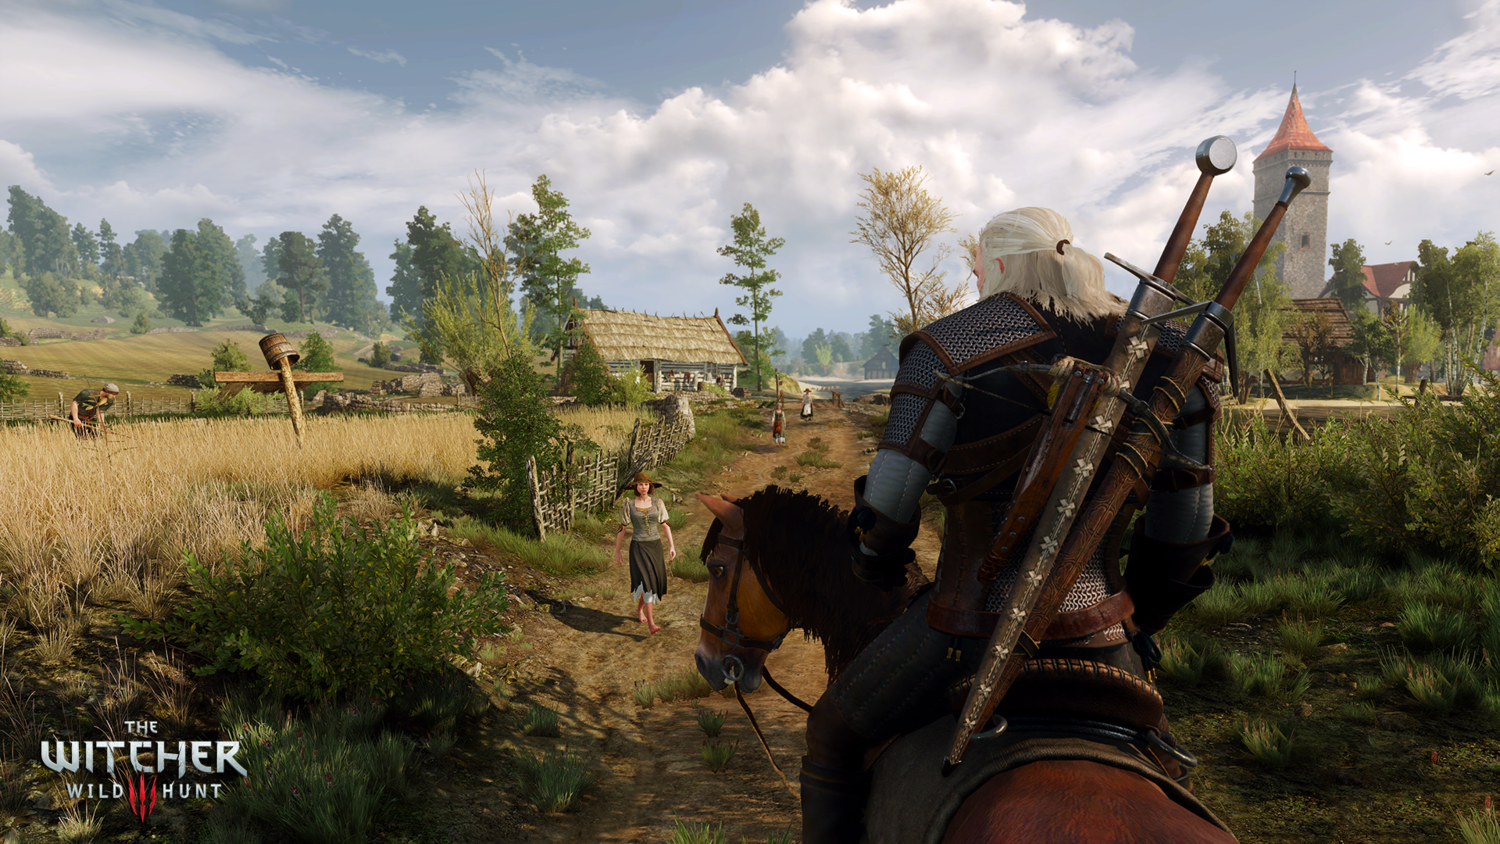 Скриншот 2 к игре The Witcher 3: Wild Hunt - Game of the Year Edition [v 1.31 + 18 DLC] (2015) PC | Repack от xatab